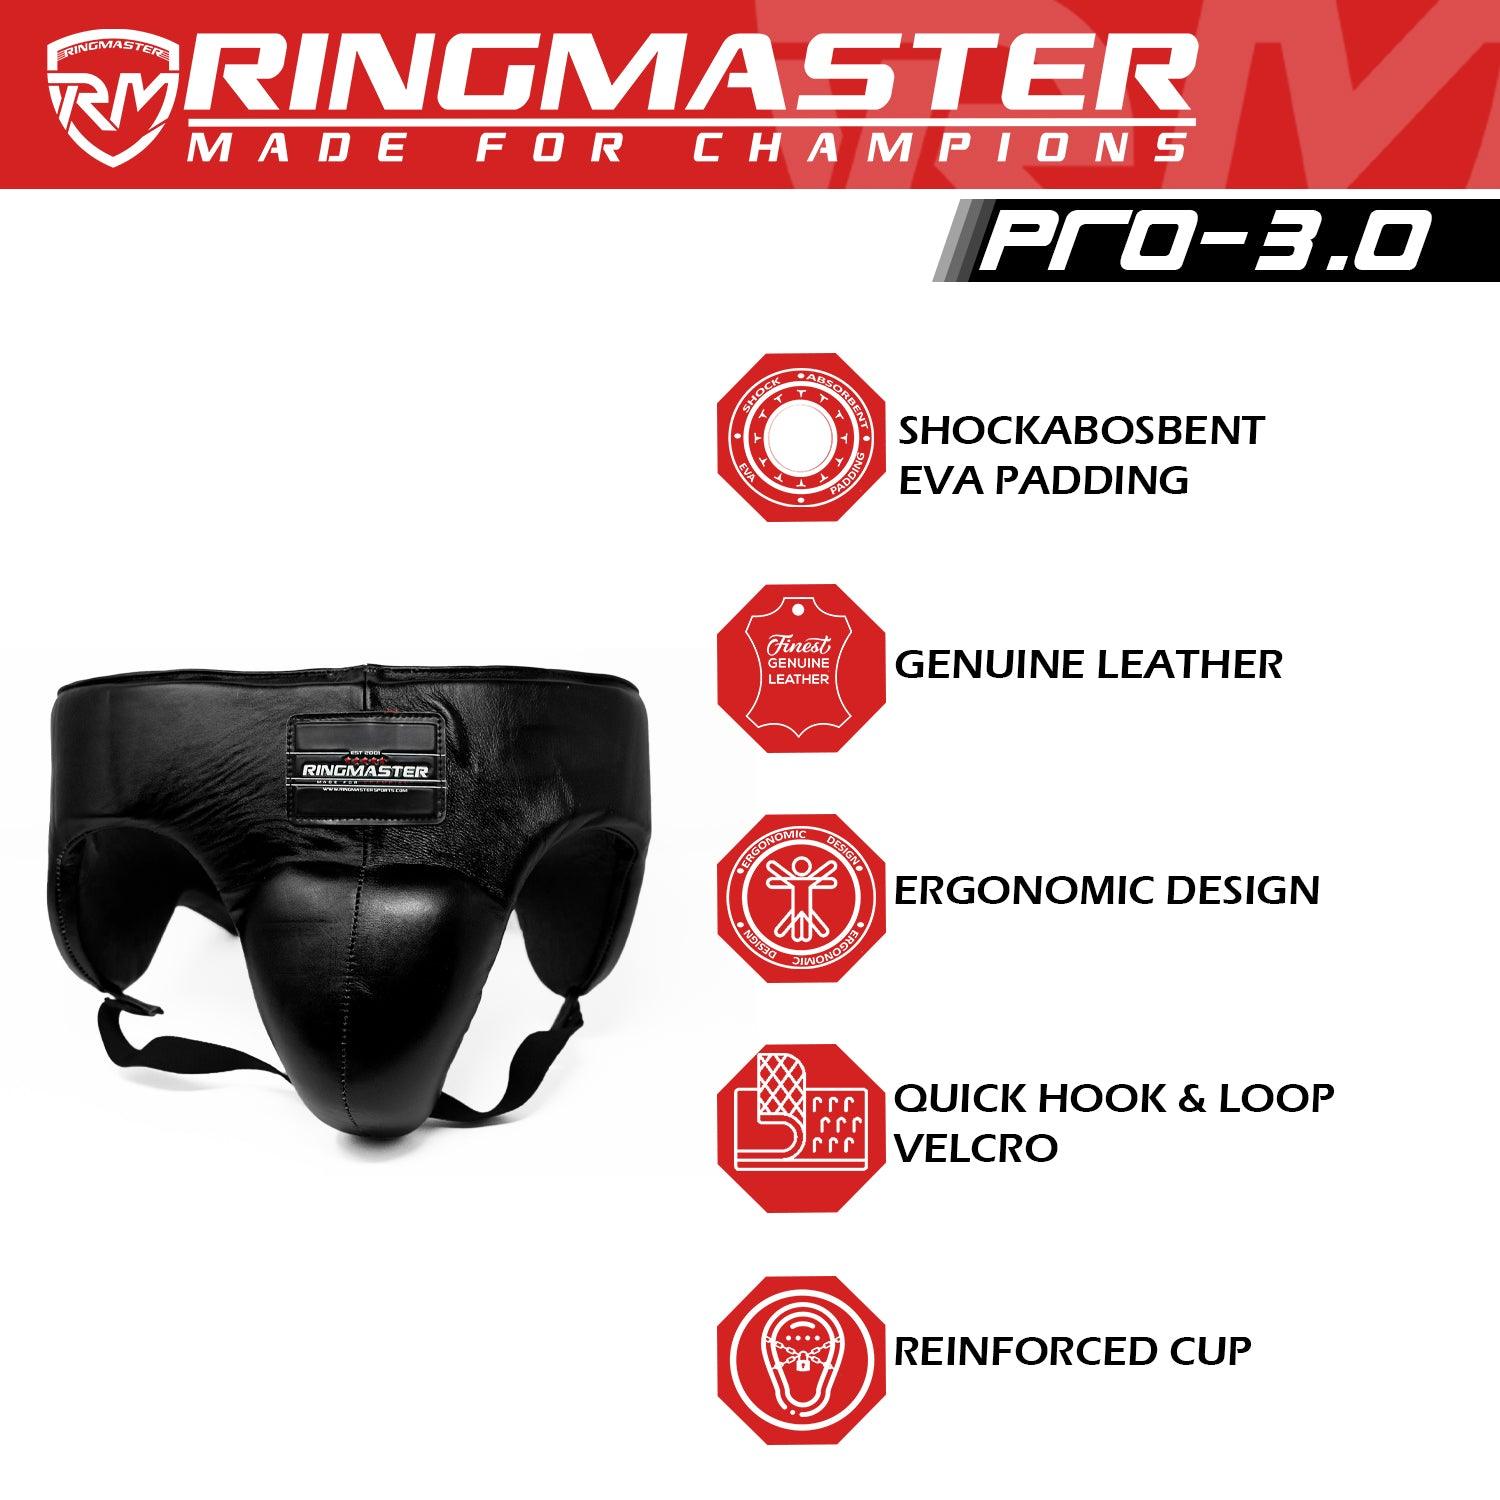 RingMaster Sports Pro 3.0 Groin Guard Genuine Leather Black - RINGMASTER SPORTS - Made For Champions